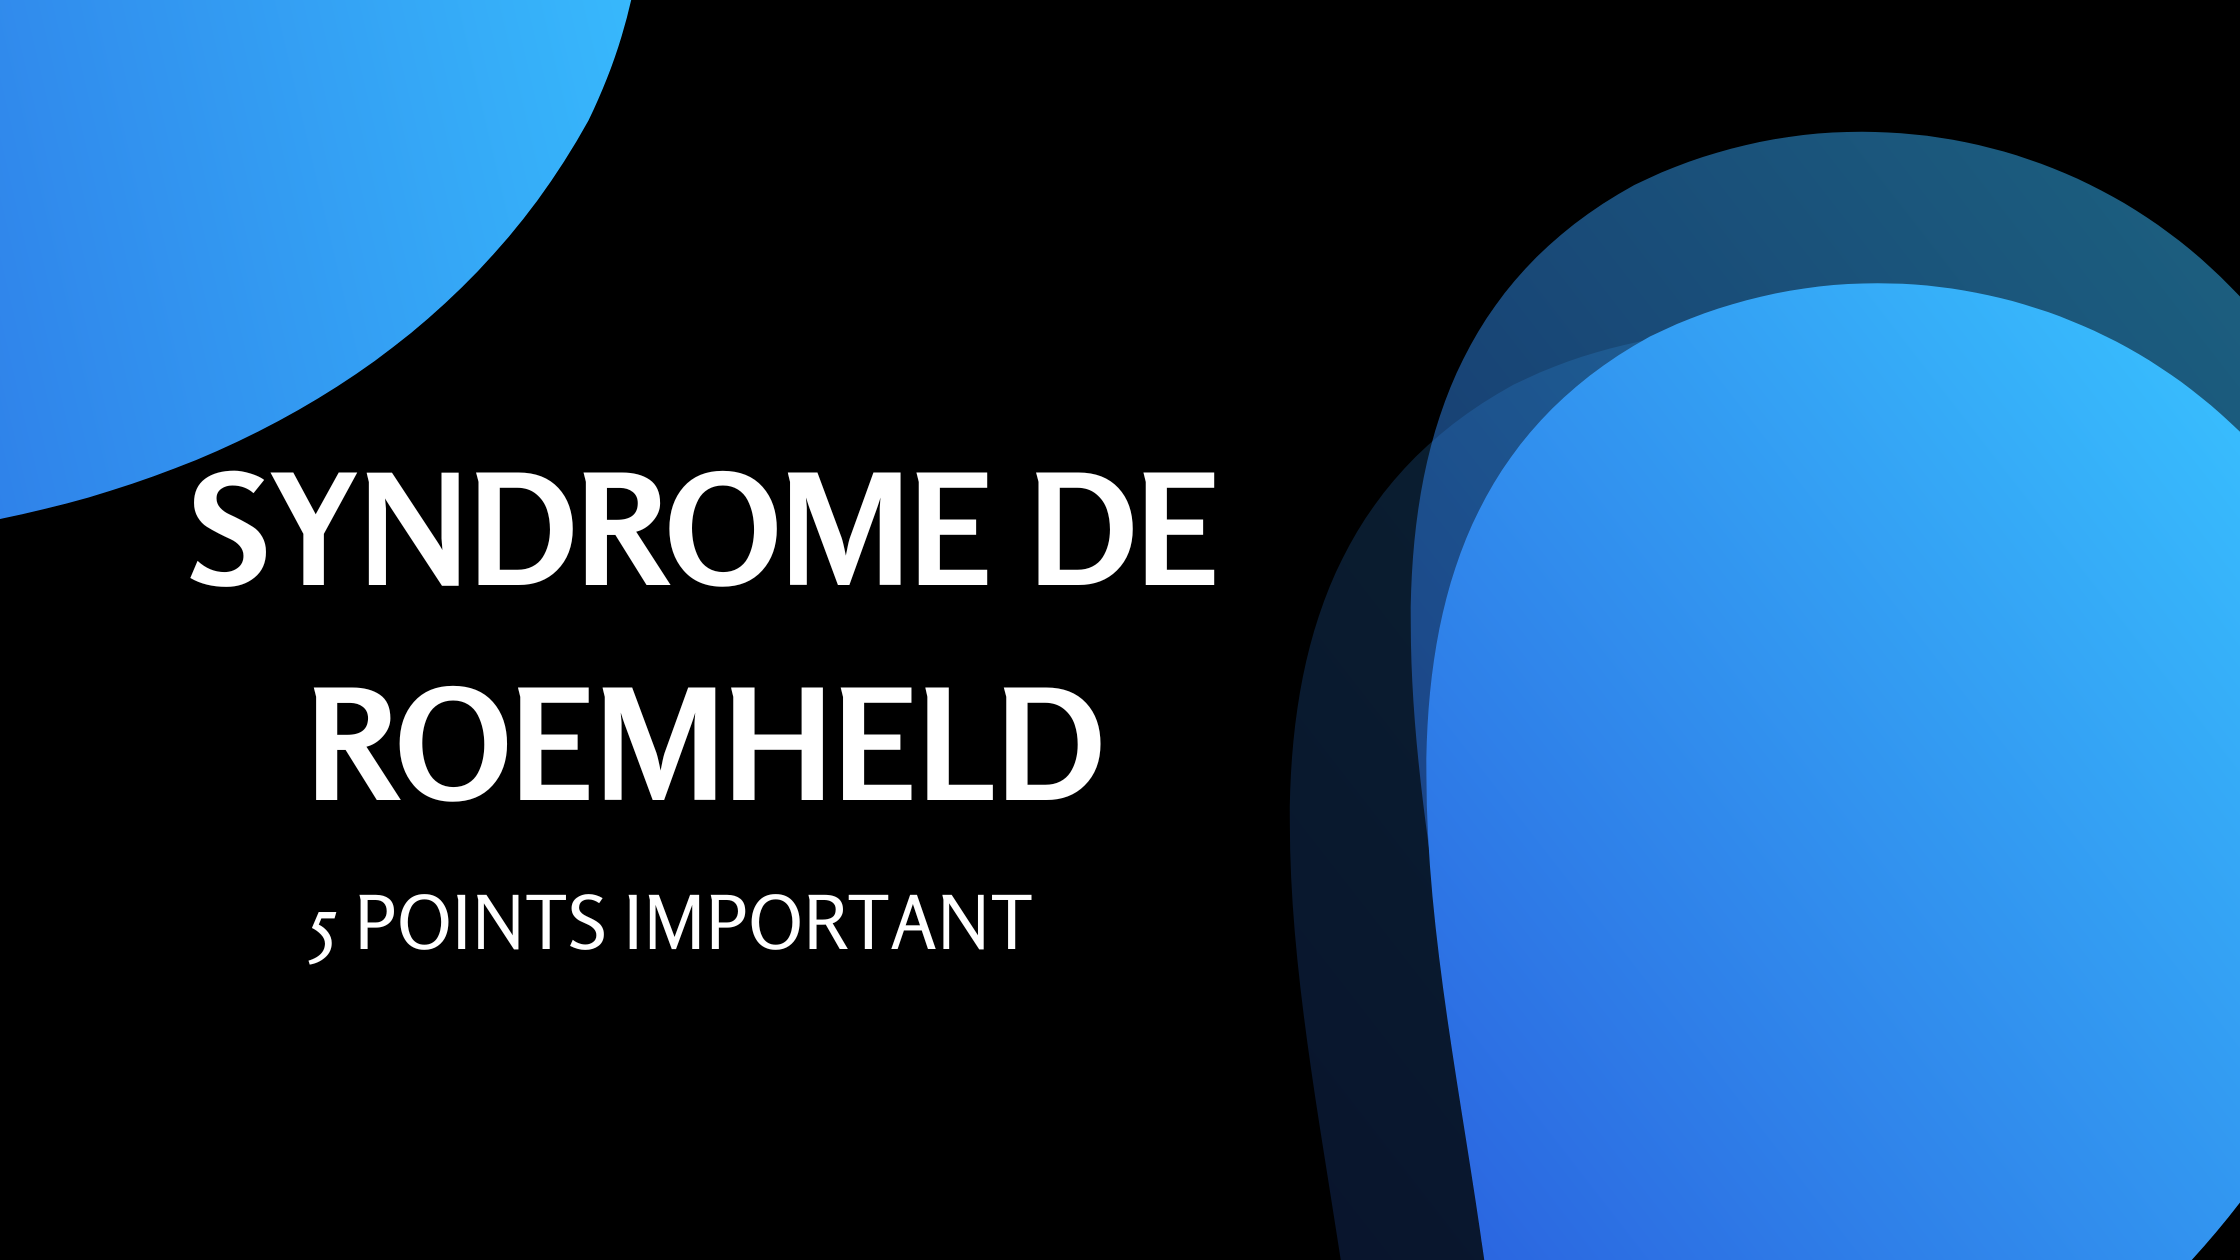 syndrome de roemheld | 5 Points Important